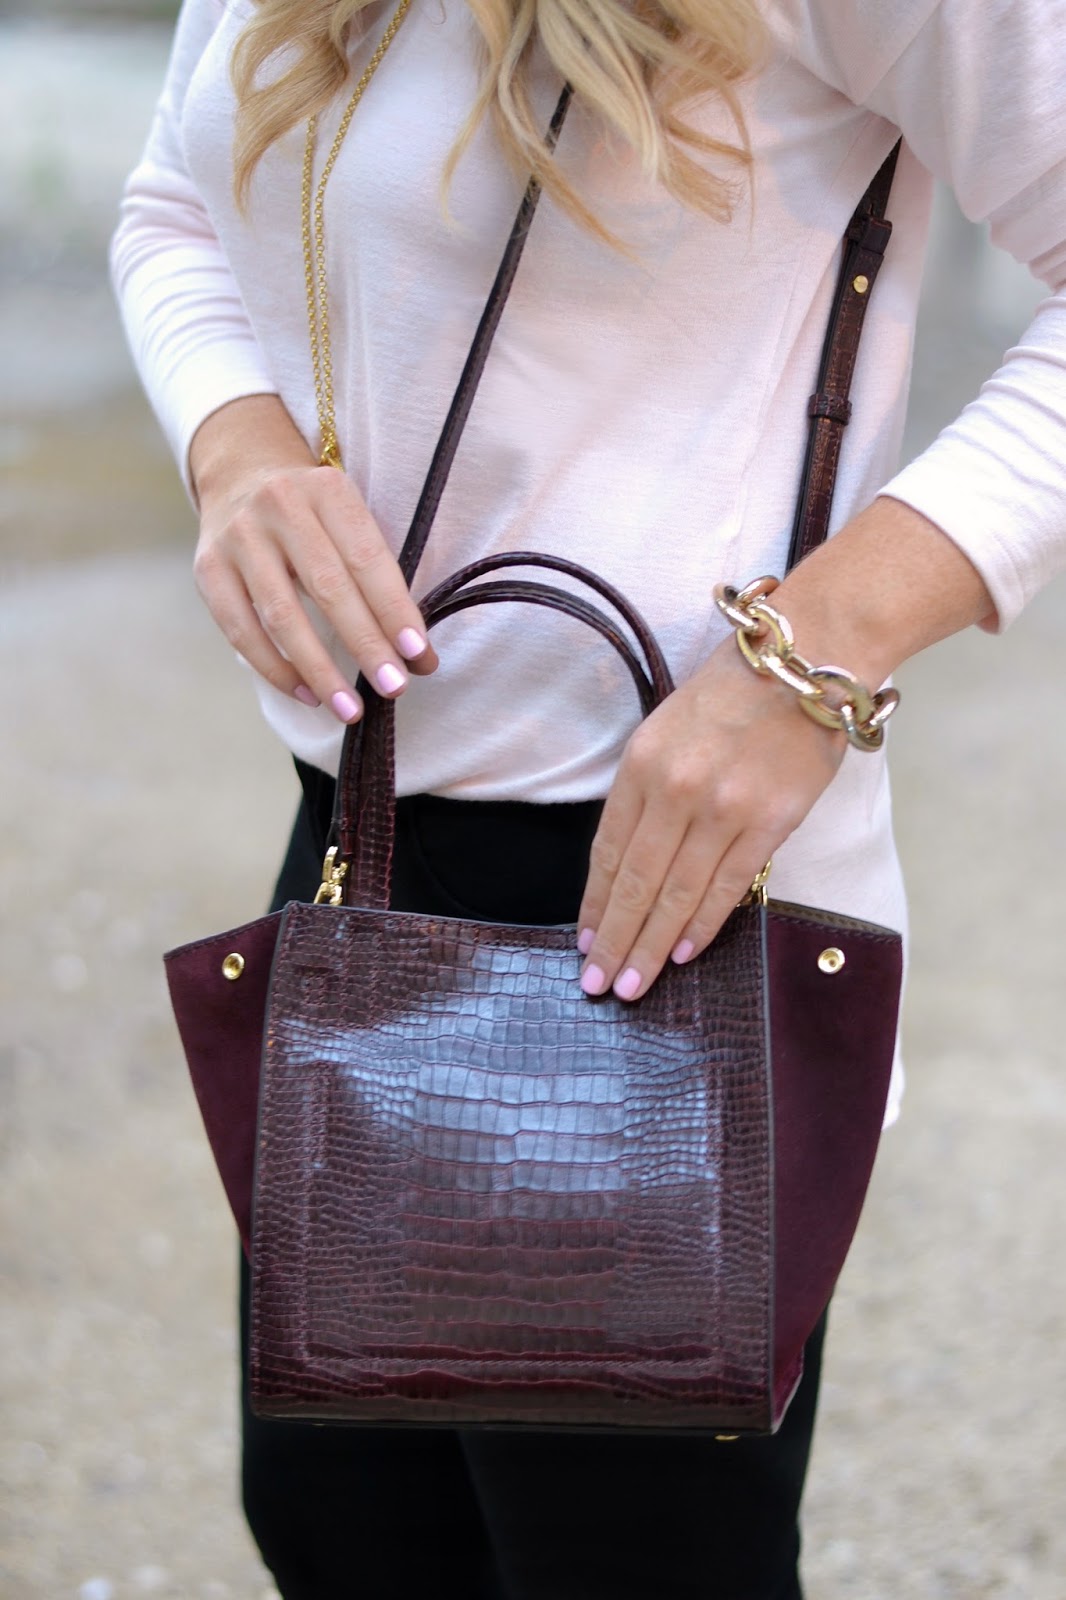 It's in the Bag | bright and beautiful | Chicago Fashion + Lifestyle Blog